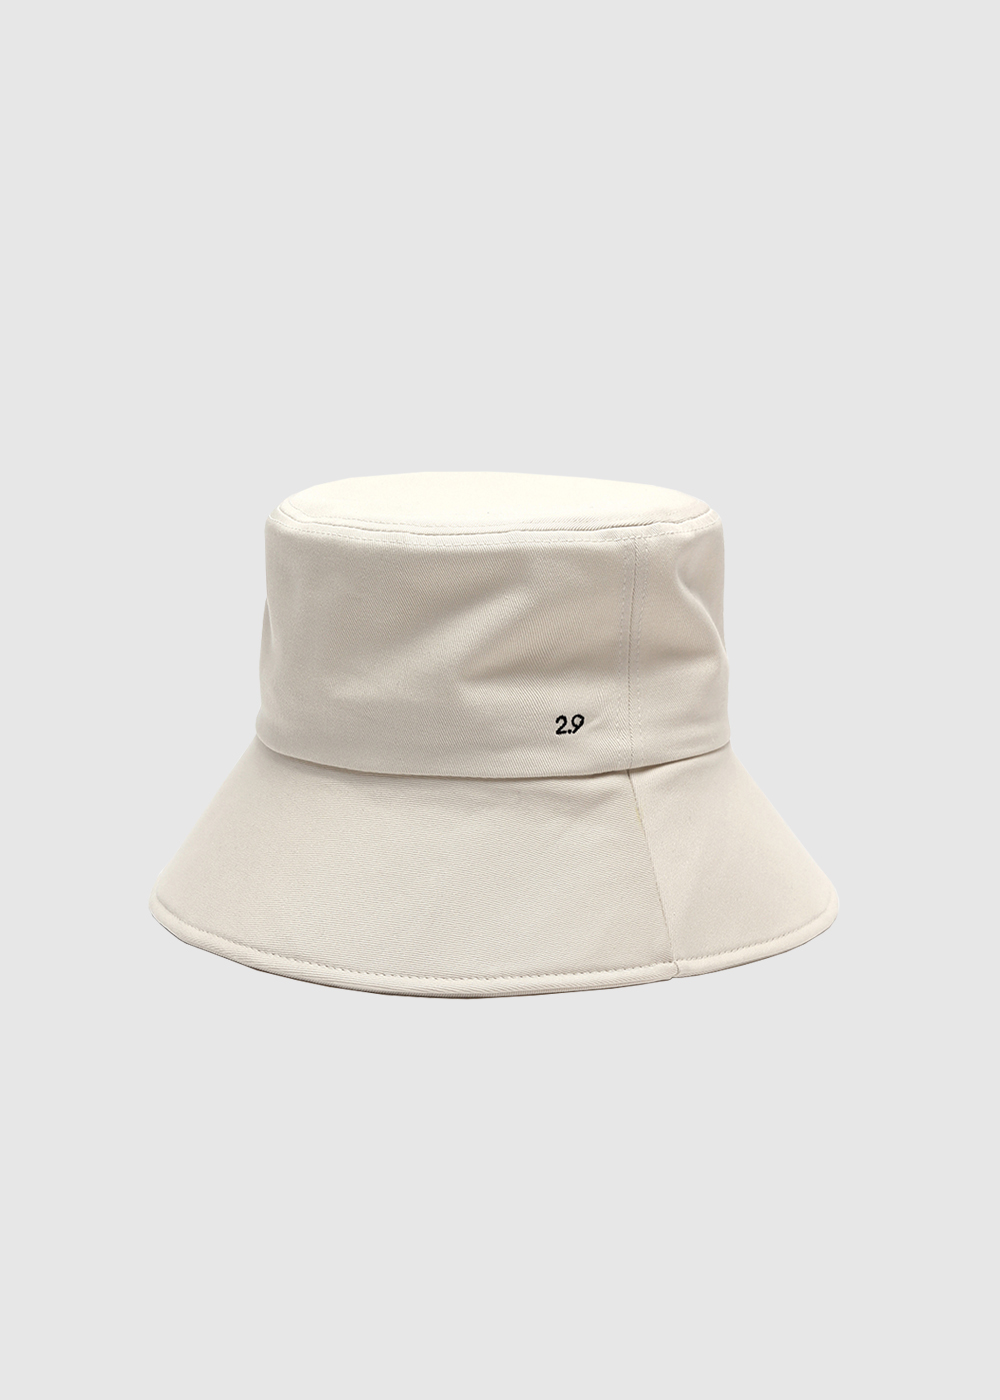 [sold out] classic bucket 2.9 ivory